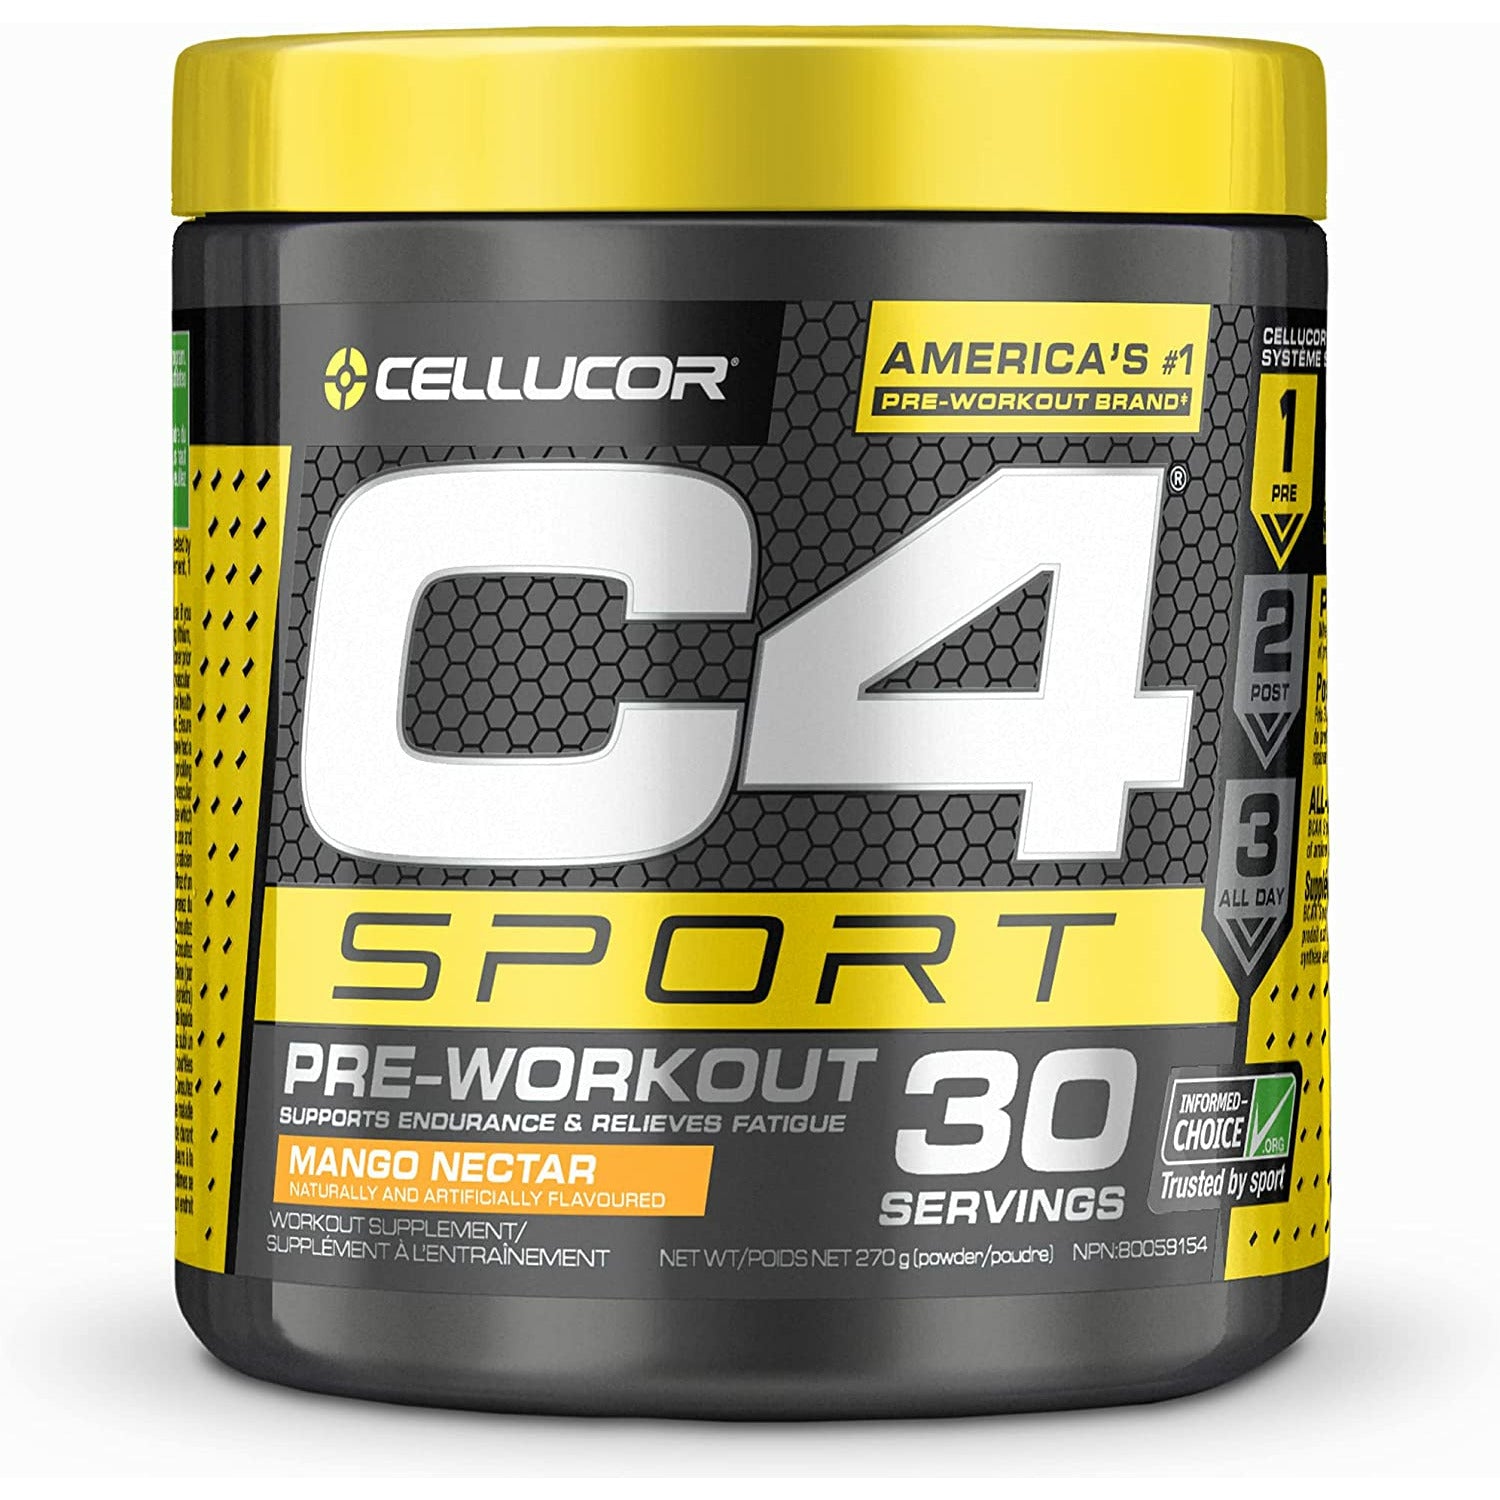 Cellucor NEW C4 SPORT Pre-Workout (30 servings) Mango Nectar Cellucor